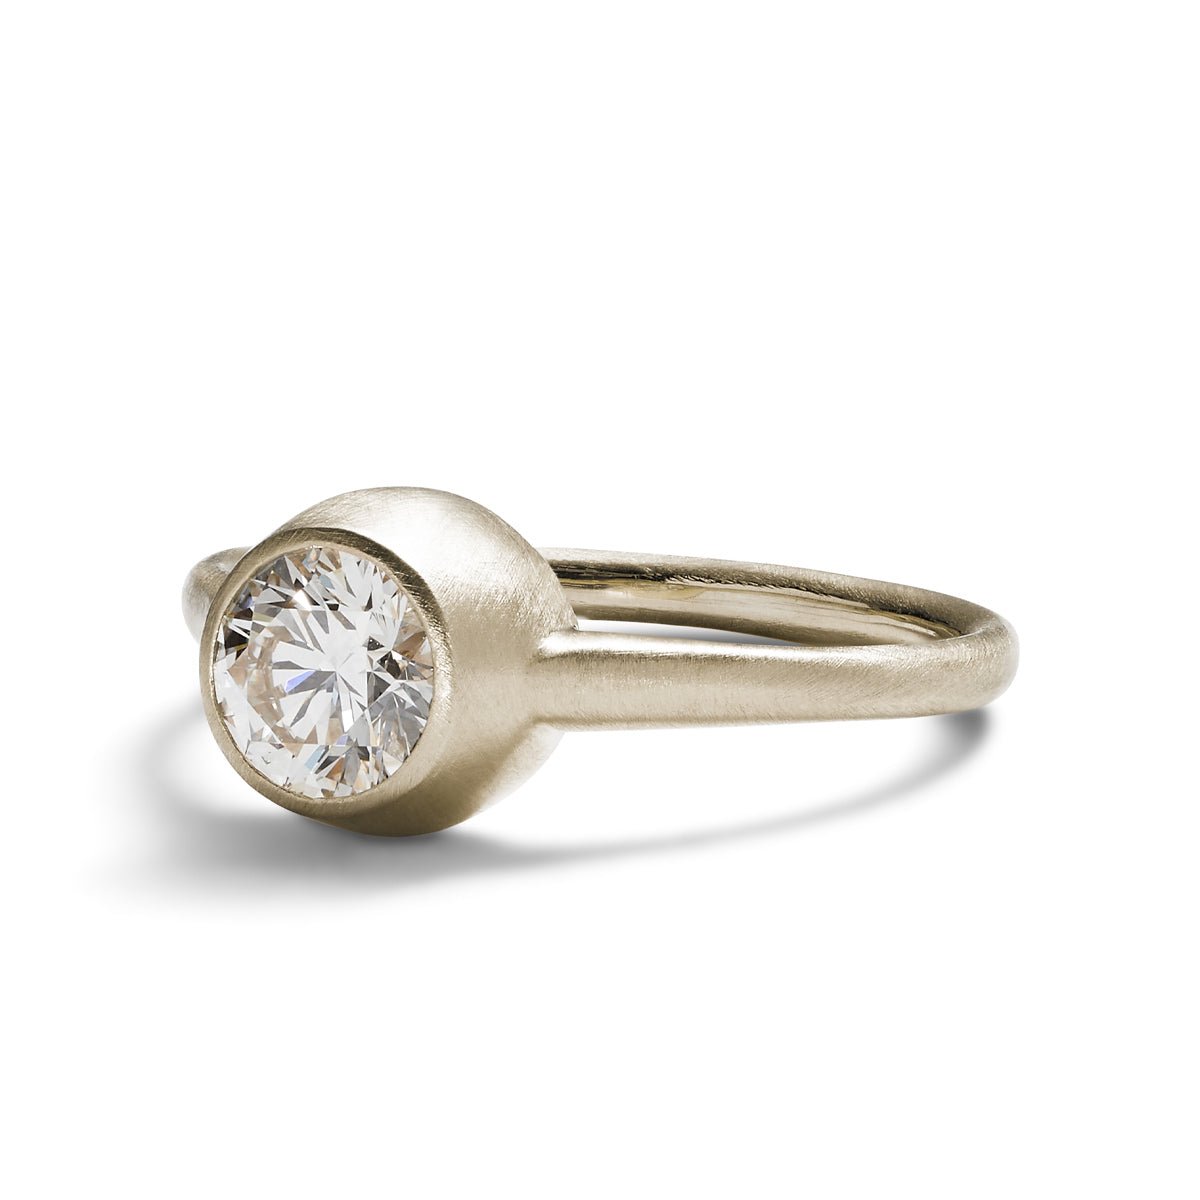 Modern statement Salire ring from Betsy & Iya. Features a round brilliant-cut lab-grown diamond (0.7 ct) and 14K white gold. Designed and handcrafted in our Portland, Oregon studio.